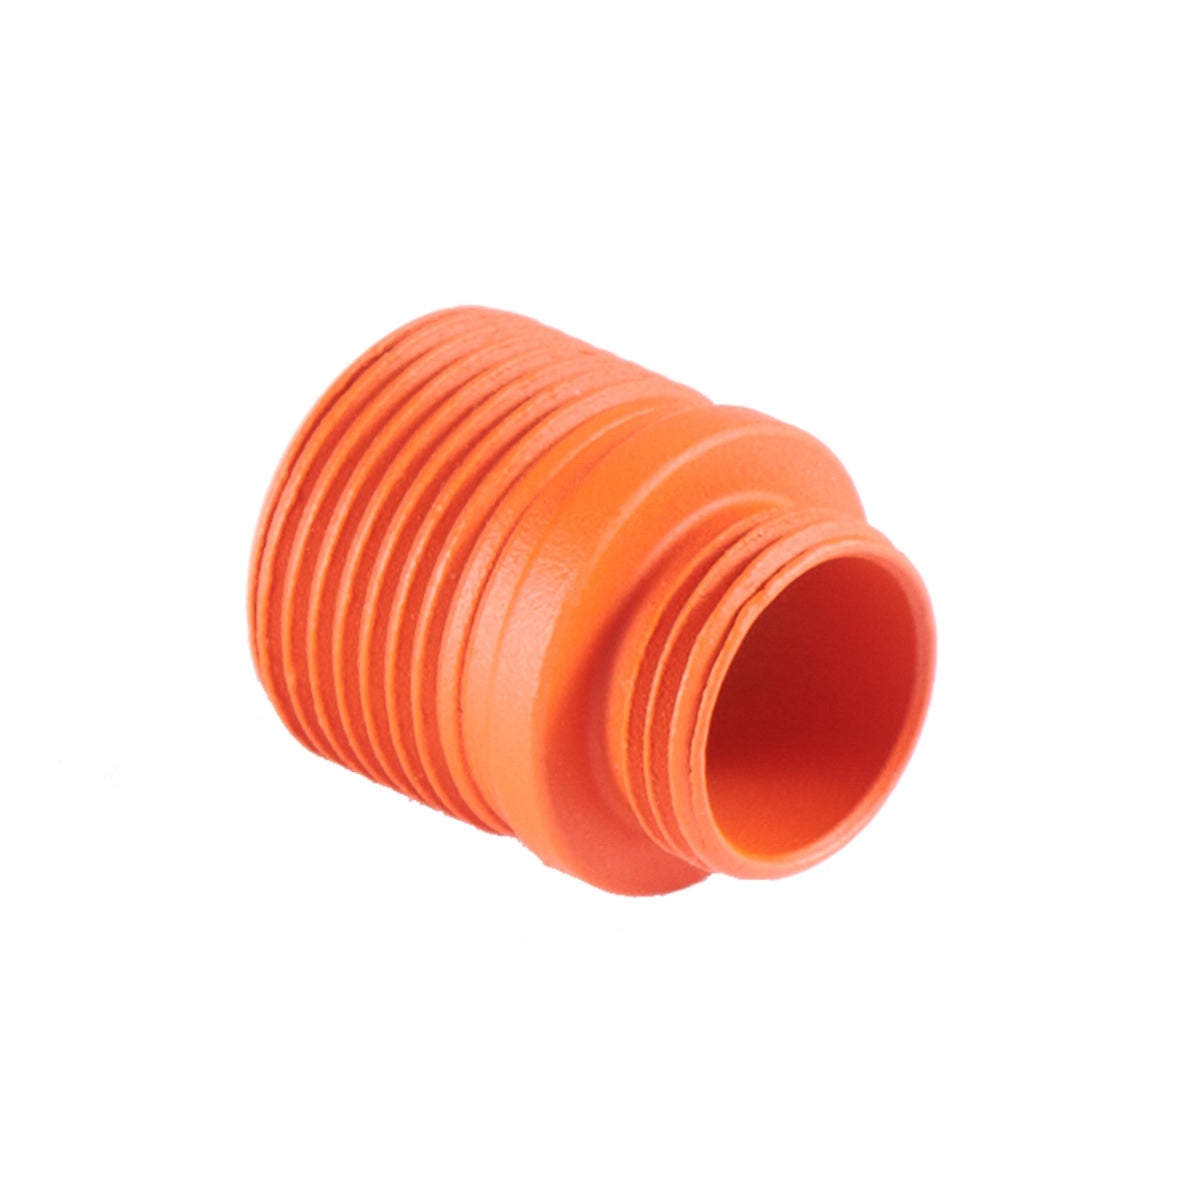 Lancer Tactical 13mm to 14mm Metal Thread Adapter (Color: Orange) - ssairsoft